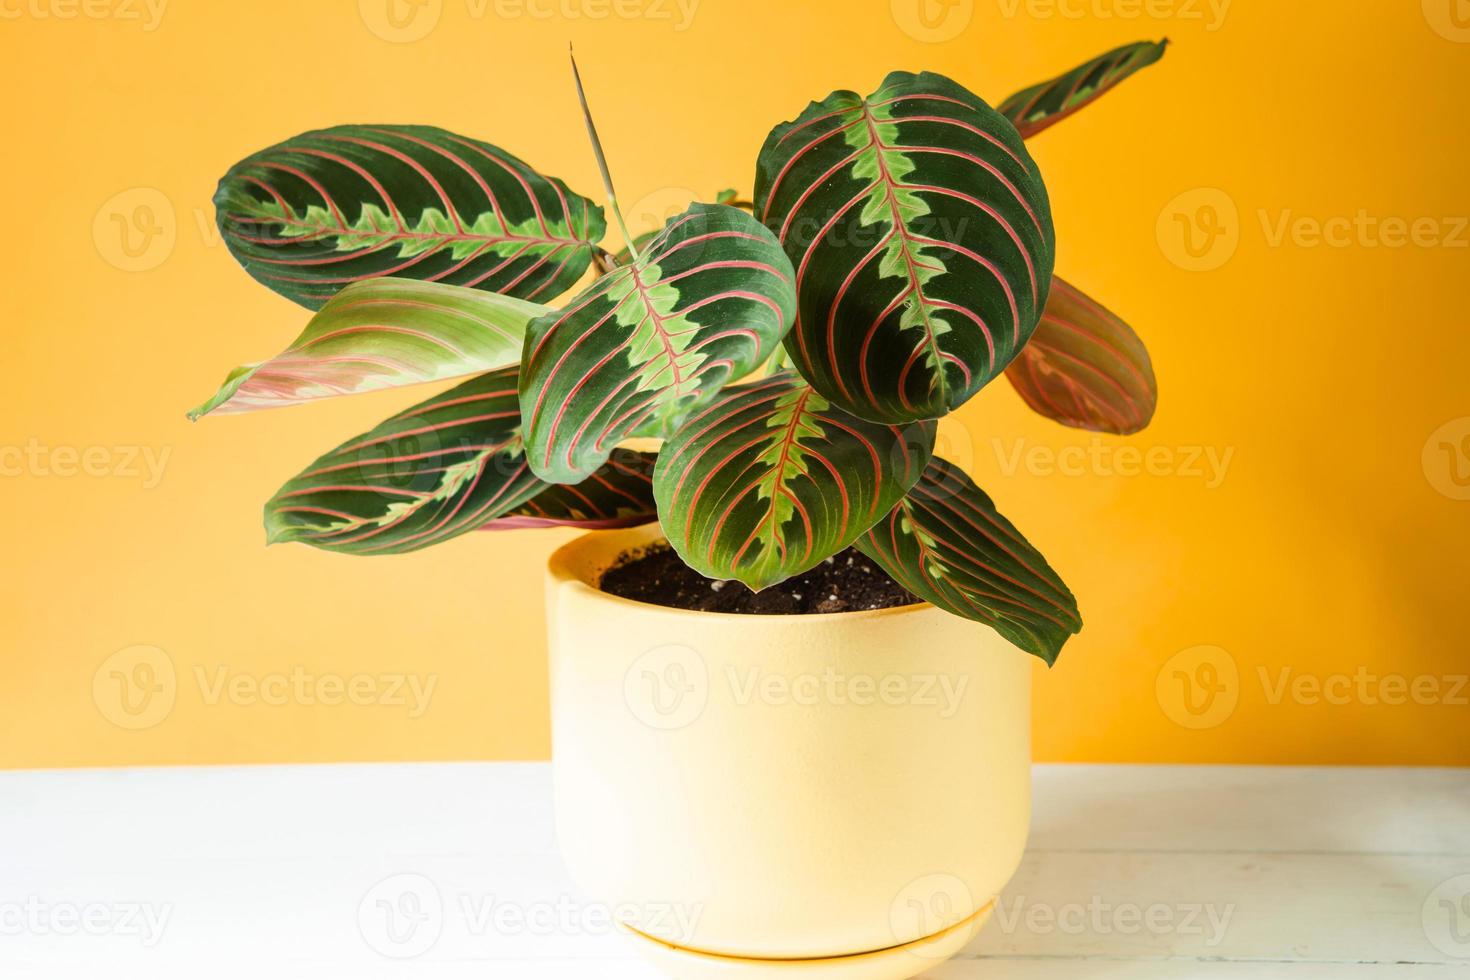 Beautiful maranta leaves with an ornament on a yellow background close-up. Maranthaceae family is unpretentious plant. Copy space. Growing potted house plants, green home decor, care and cultivation photo